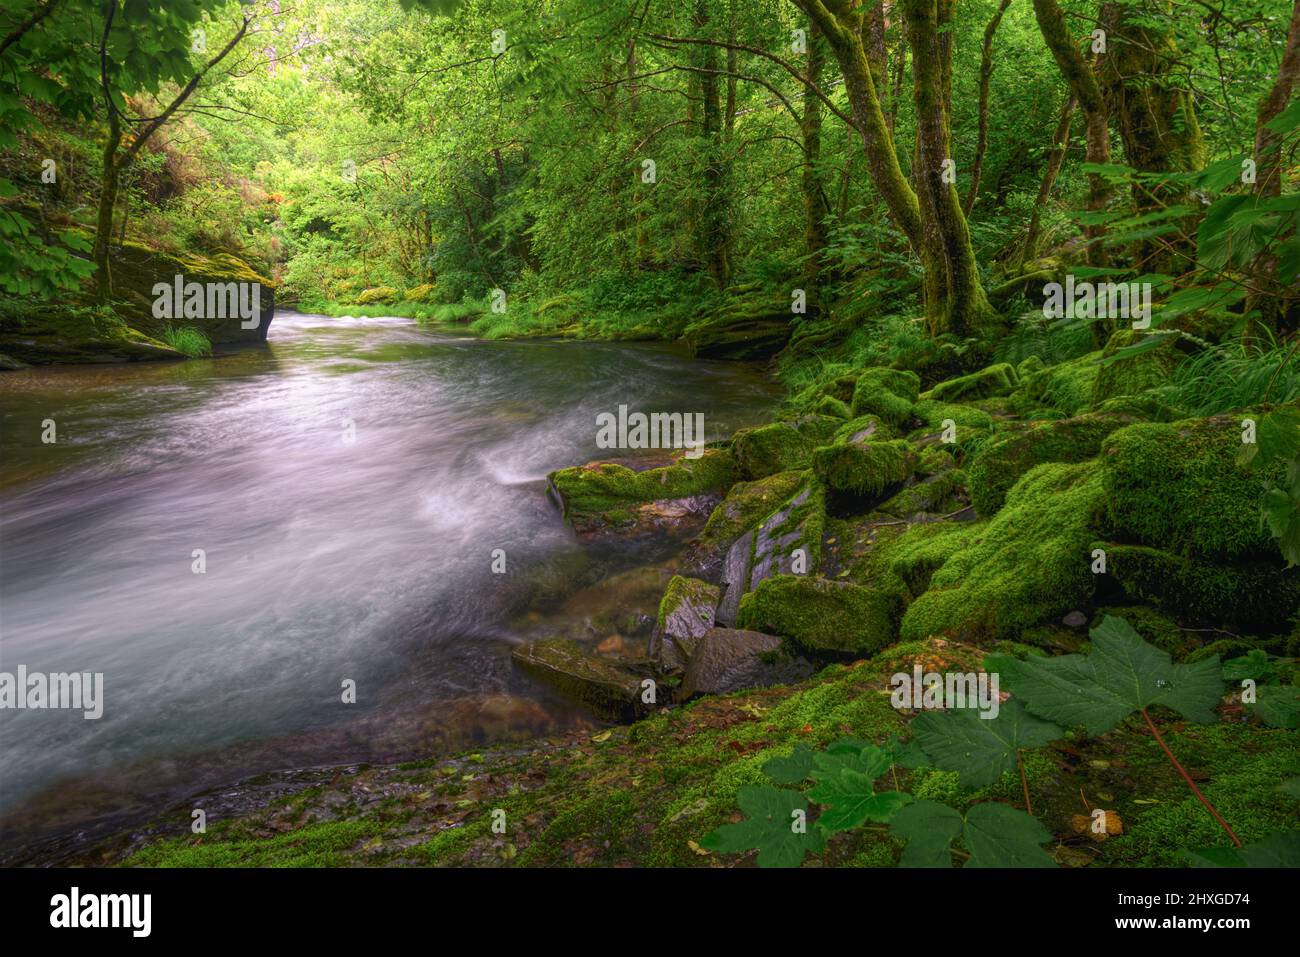 Overwhelming greenery on mossy rocks and vegetation by a river in Courel Mountains Geopark in Galicia Stock Photo